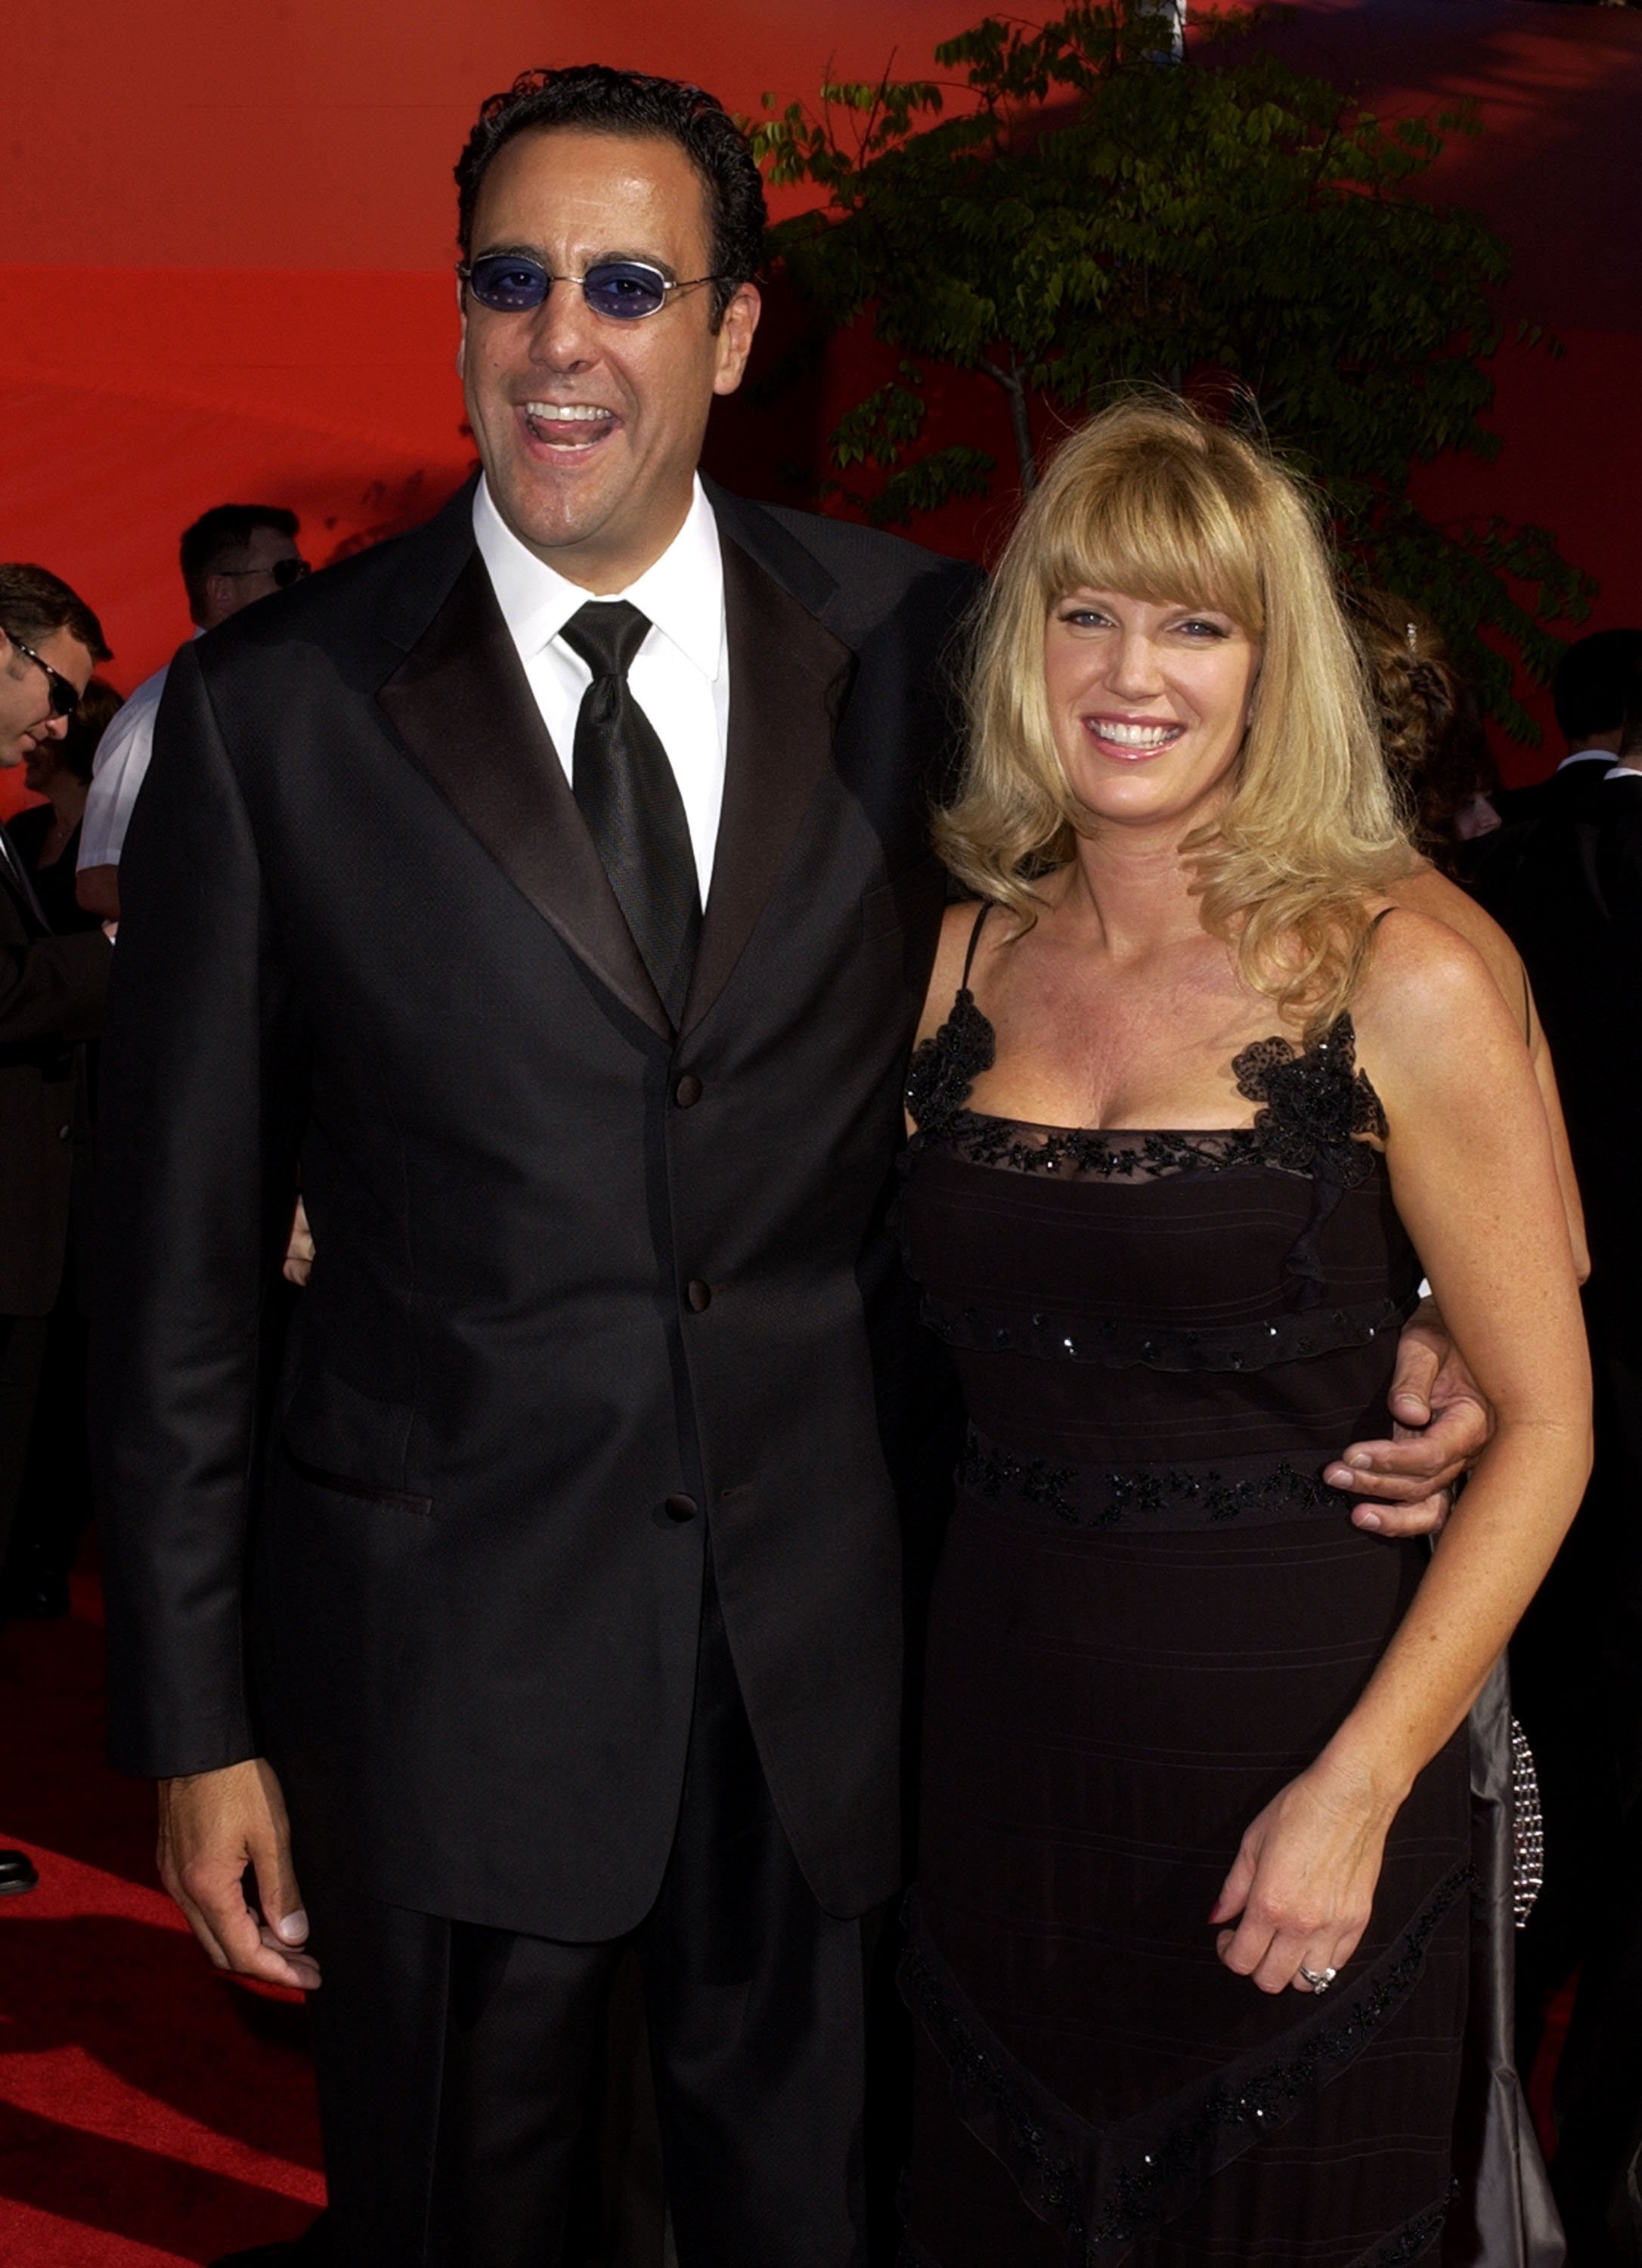 Brad Garrett and former wife Jill Diven at The 54th Annual Primetime Emmy Awards - in Los Angeles, California in September 2002. | Photo: Getty Images